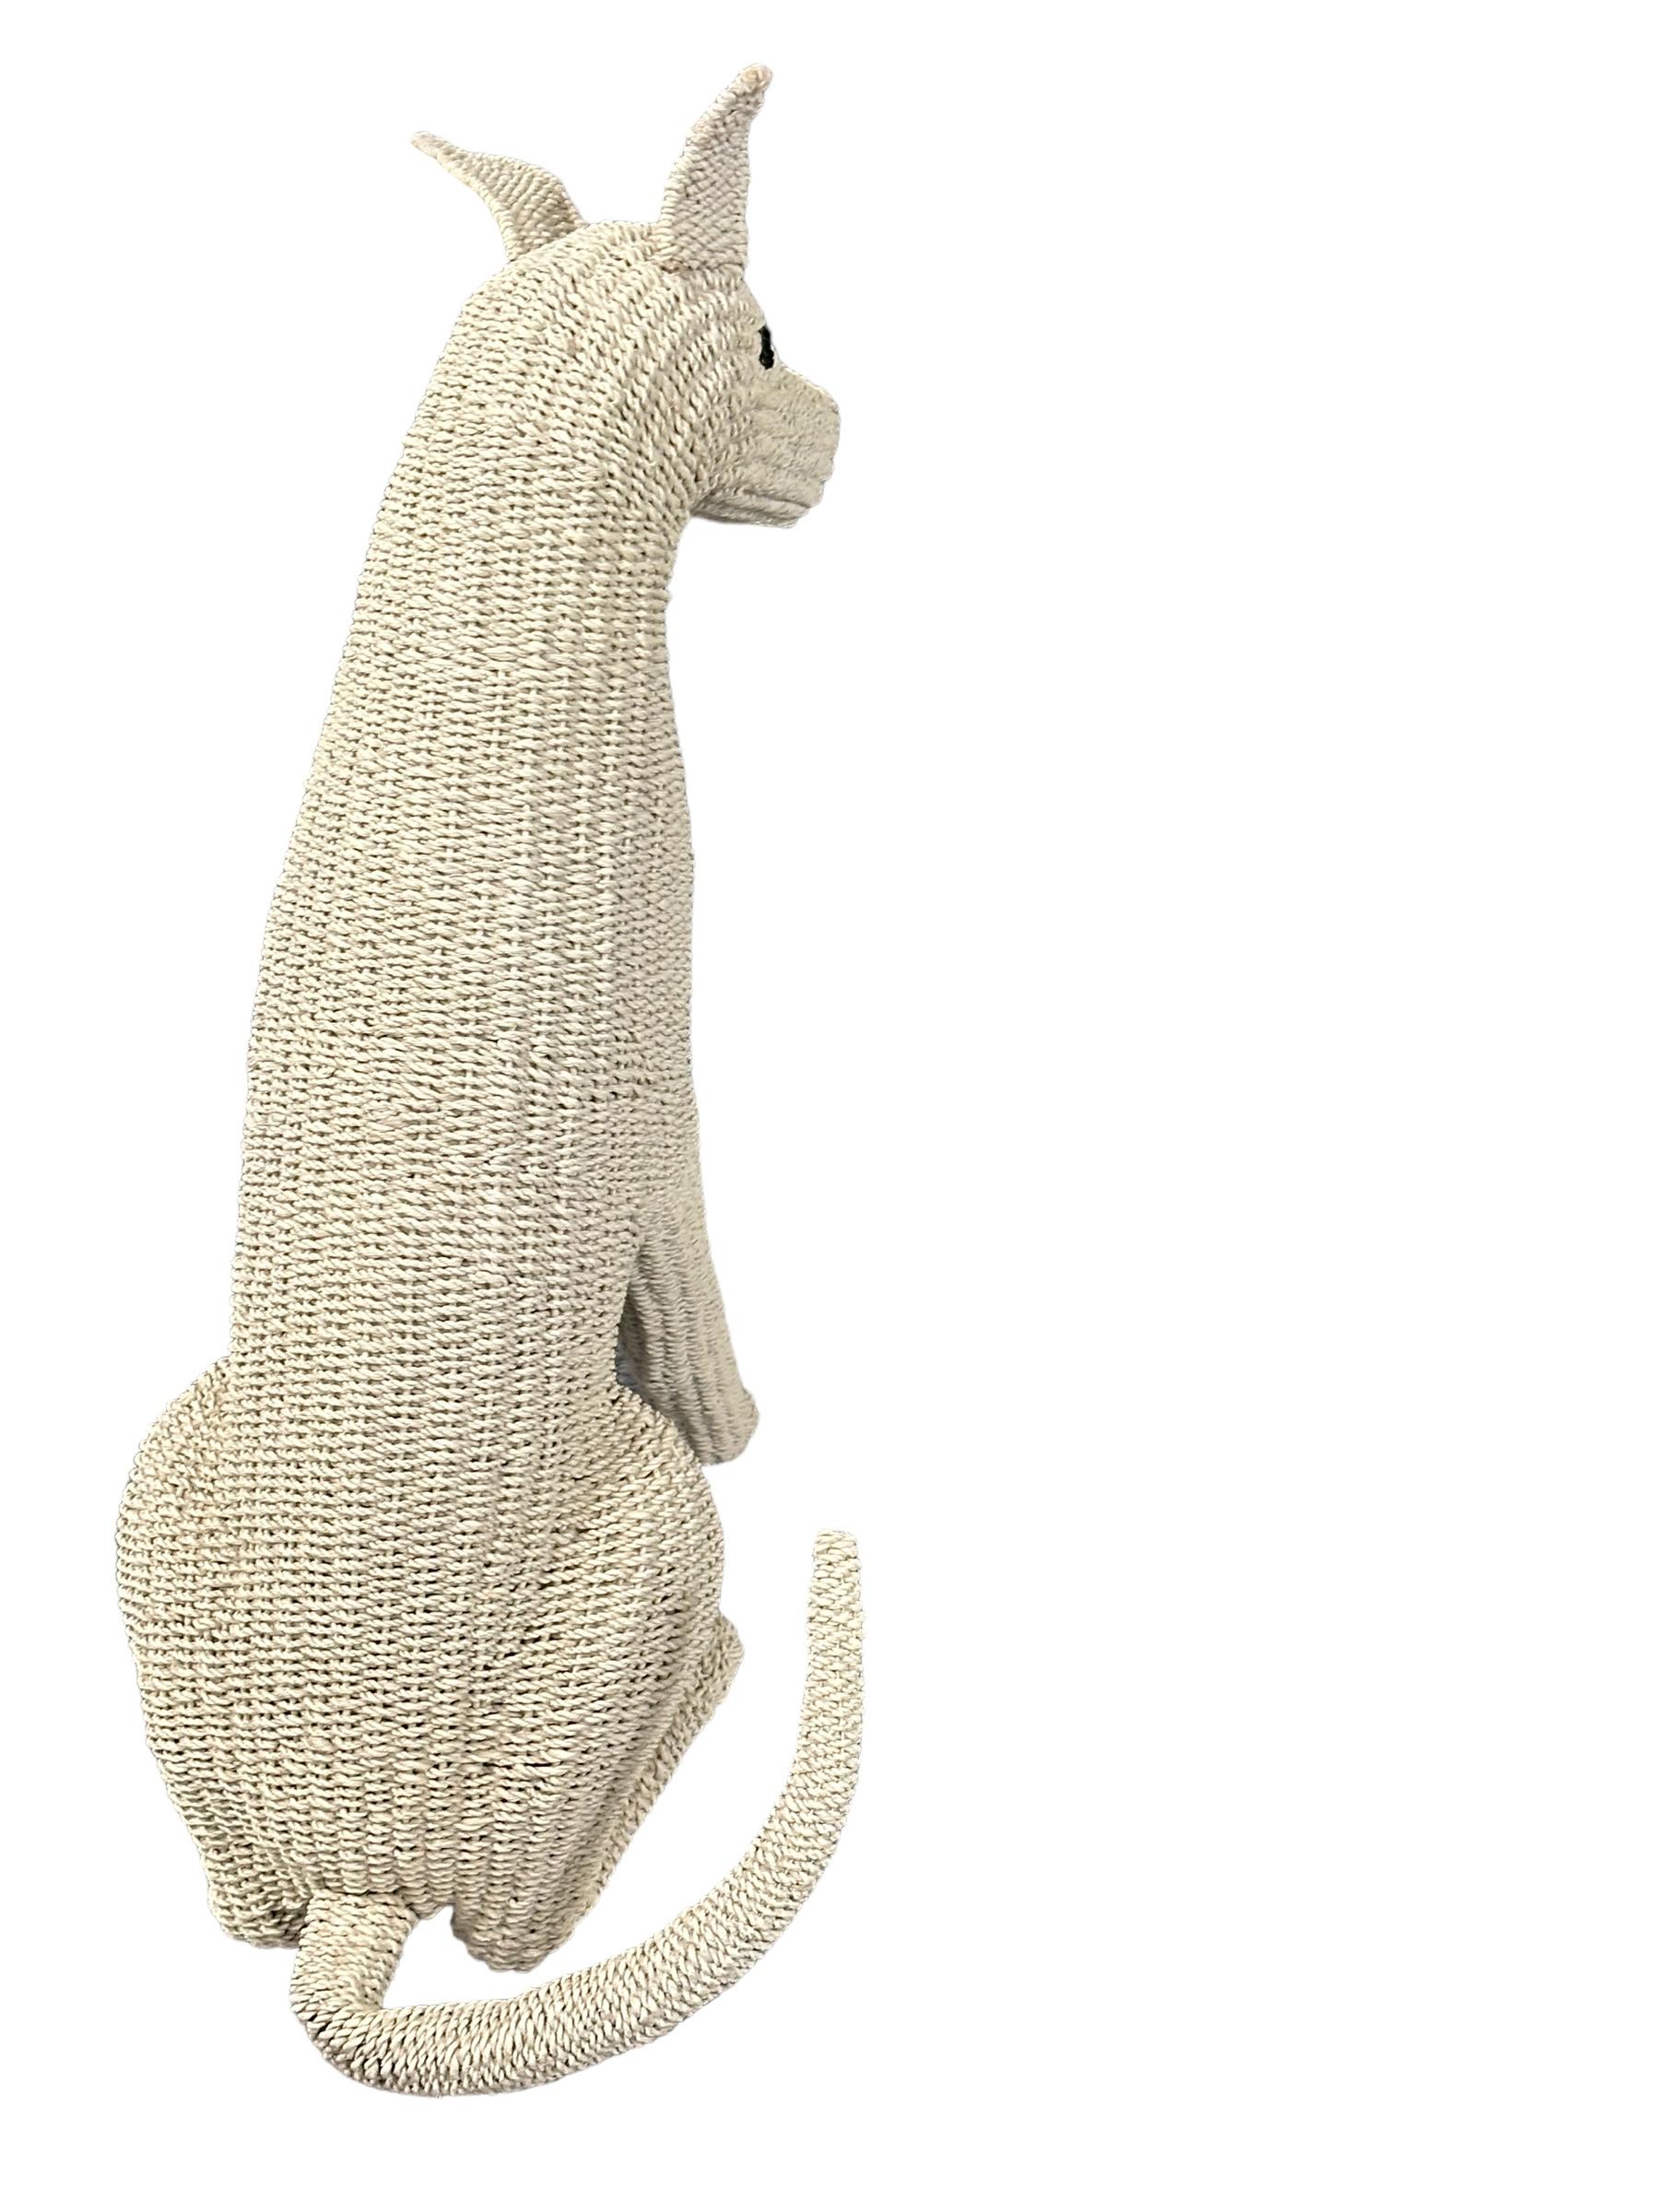 Mid-20th Century Stunning Life Size White Rattan Wicker Dog Statue Figure, Italy, 1960s For Sale